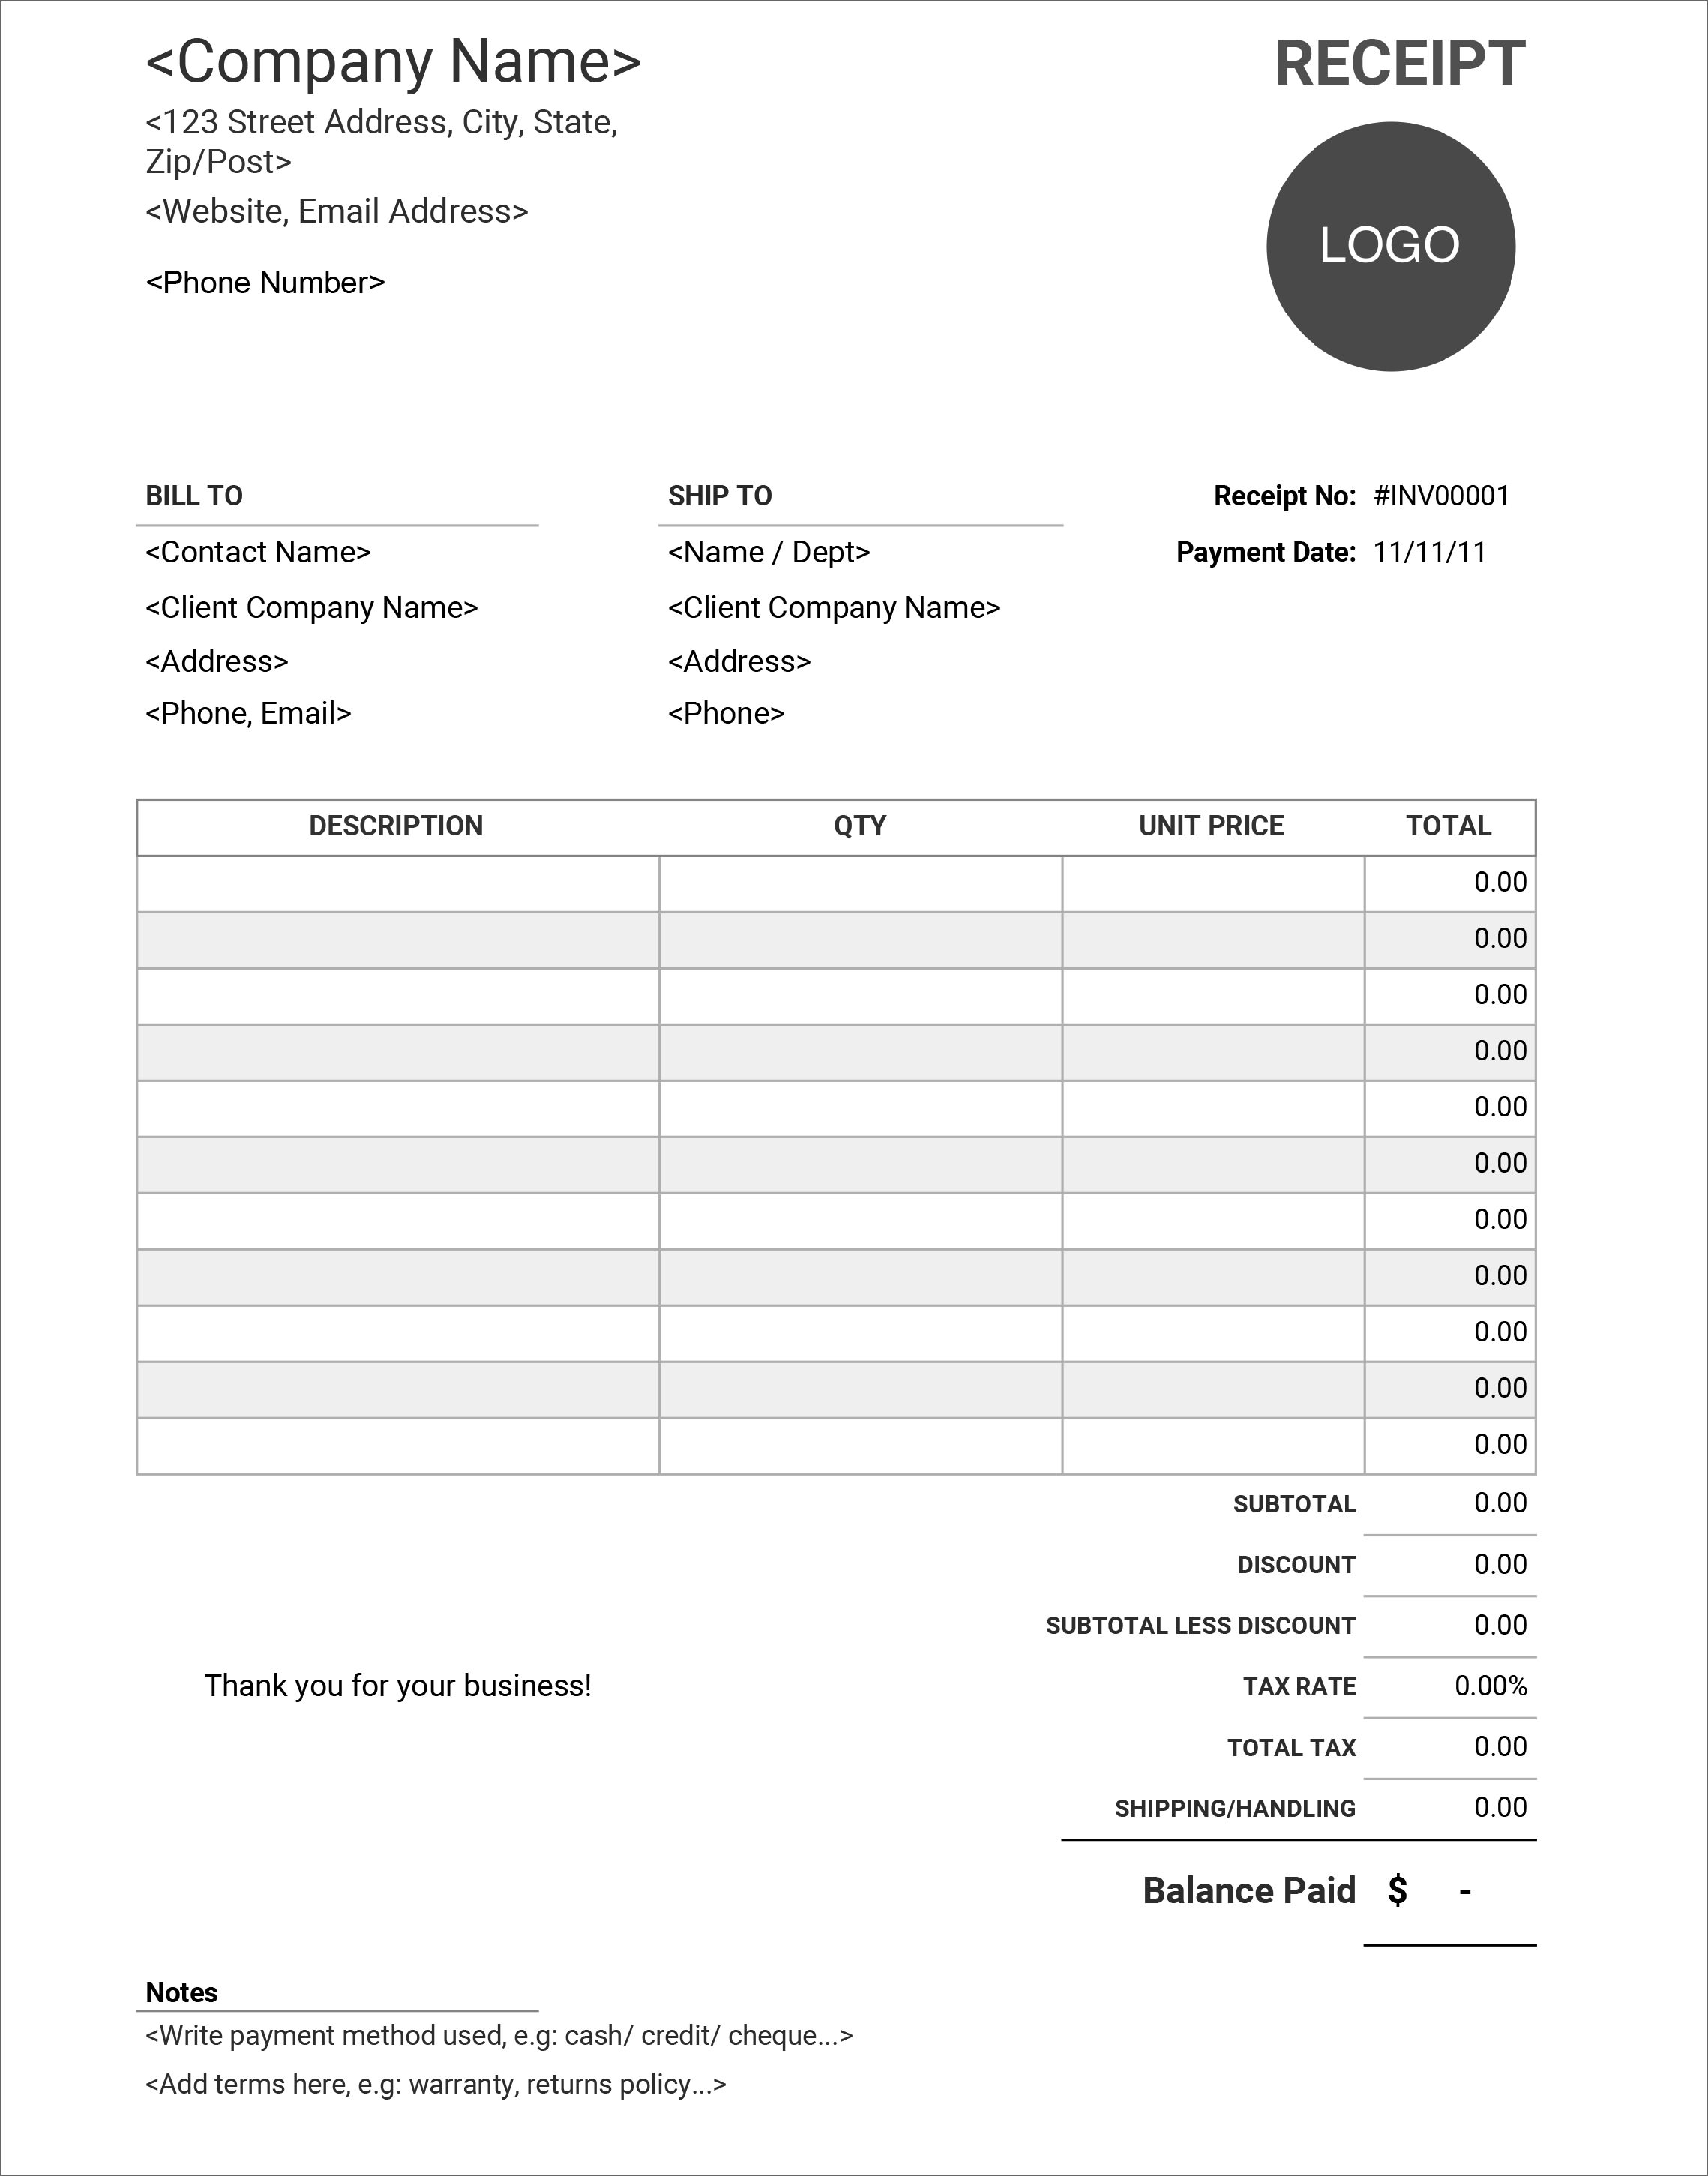 14 Free Receipt Templates - Download For Microsoft Word, Excel, And ...